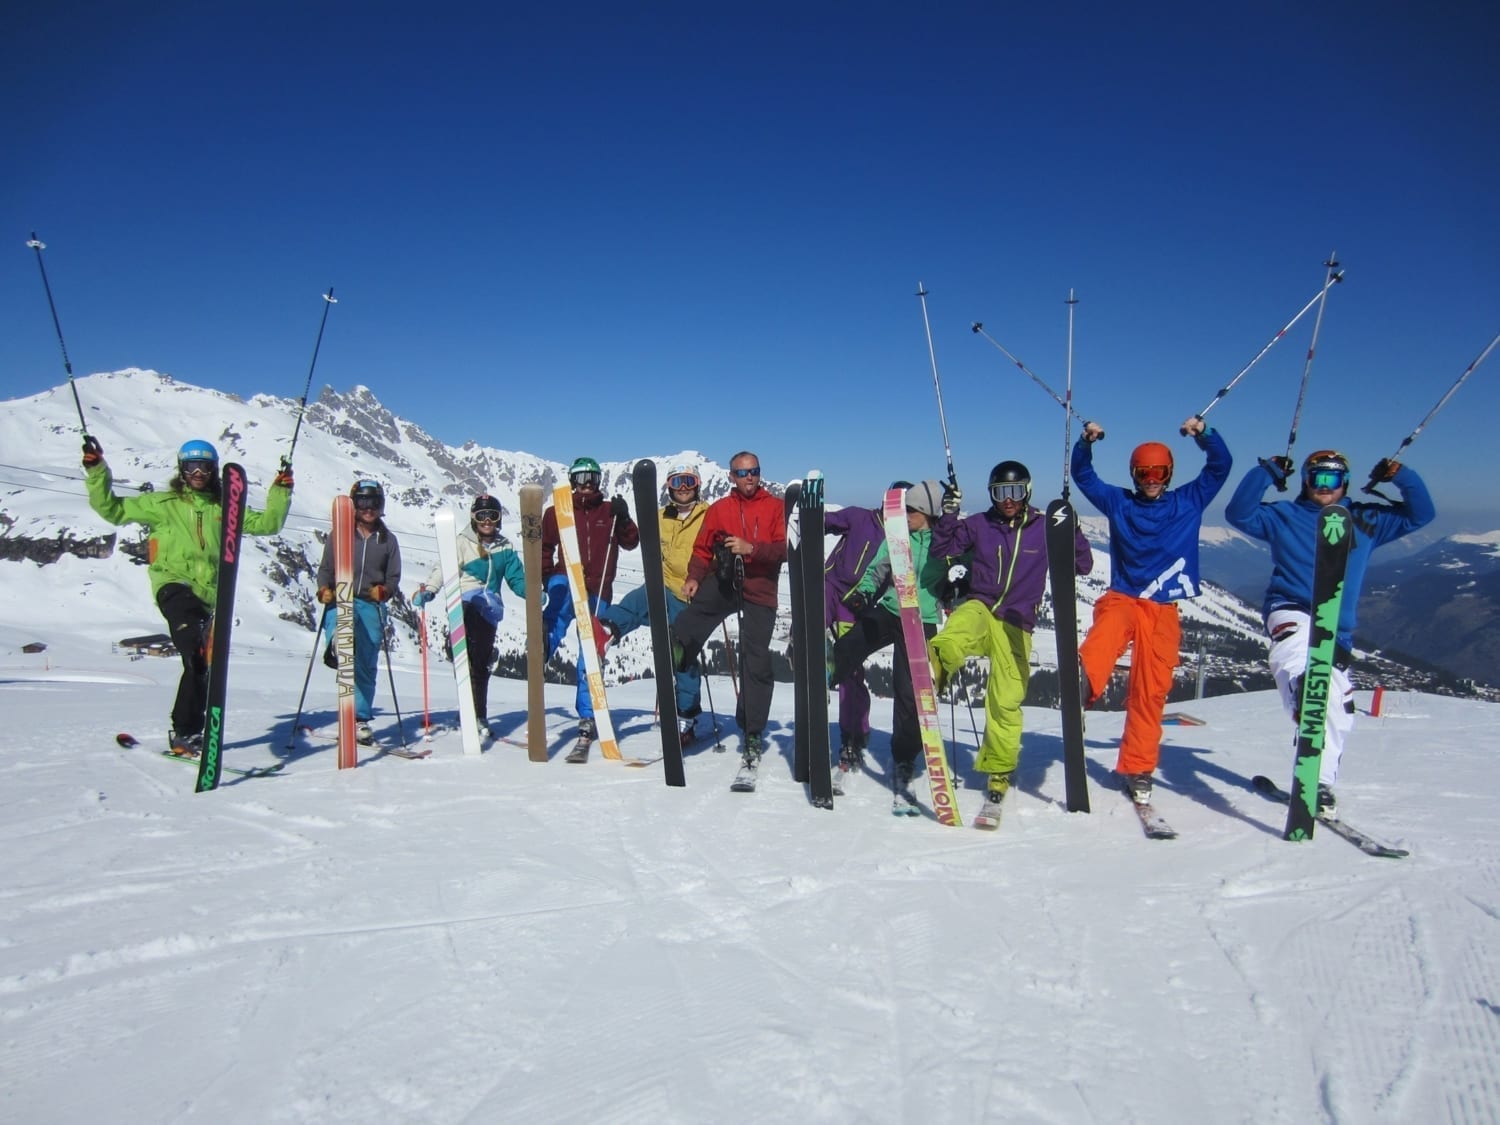 images/Group-clients-skis-up-1500x1125.jpg